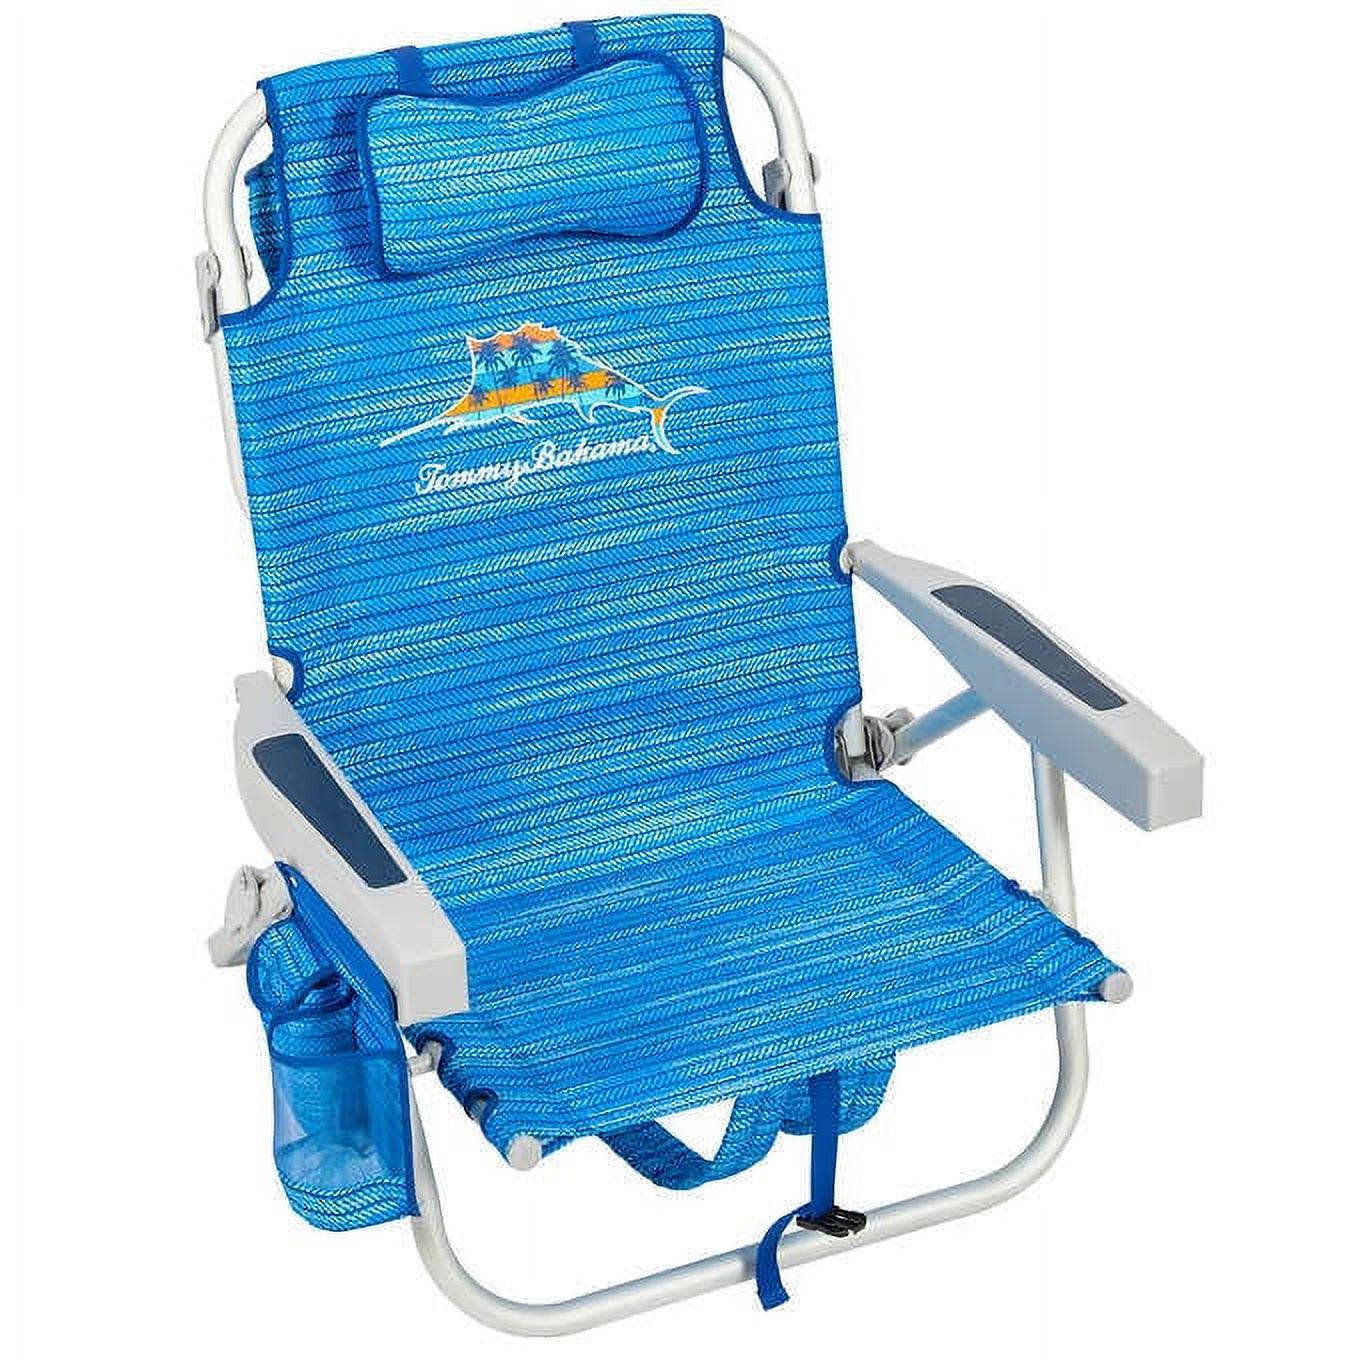 2022 Tommy Bahama 5 Position Backpack Beach Chair - Blue - image 1 of 5